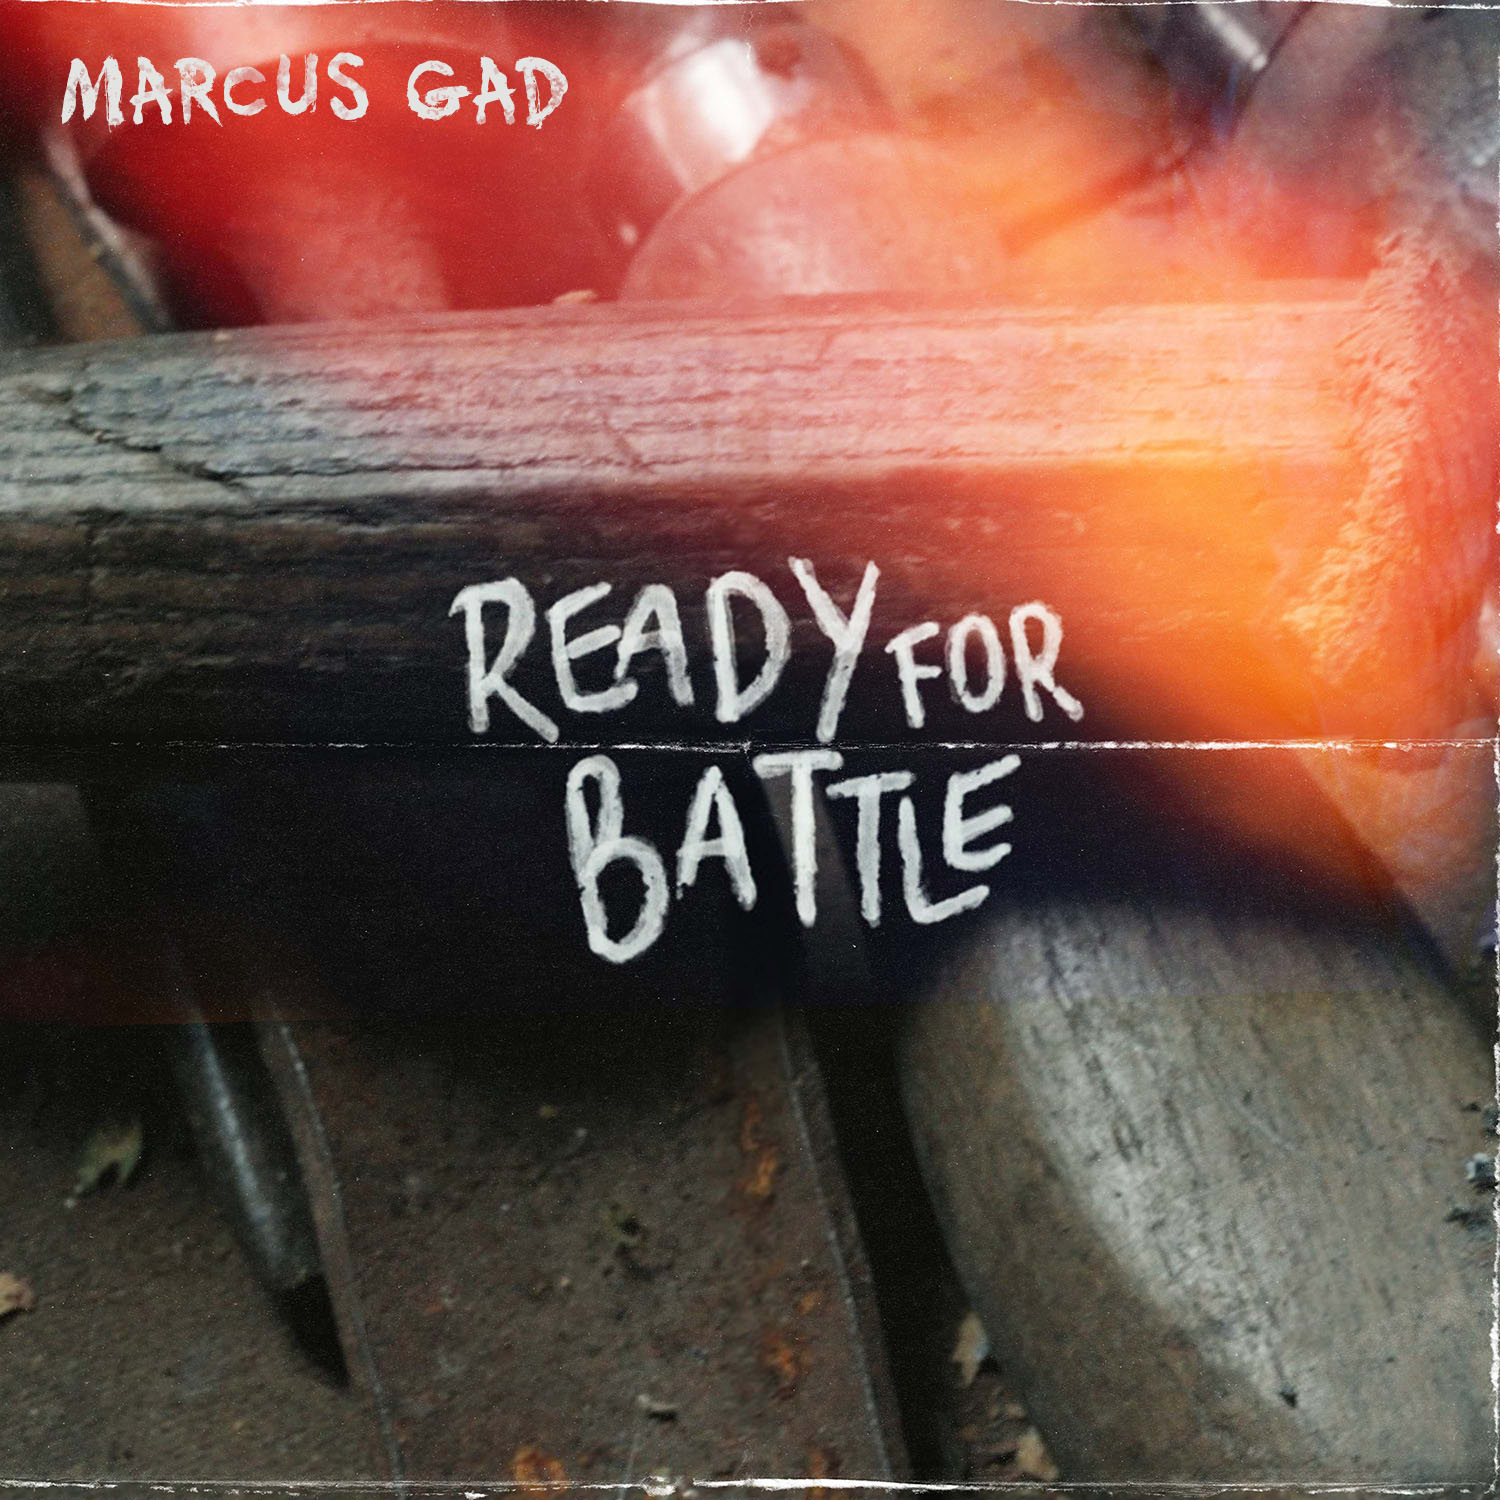 Marcus Gad: ‘Ready For Battle’